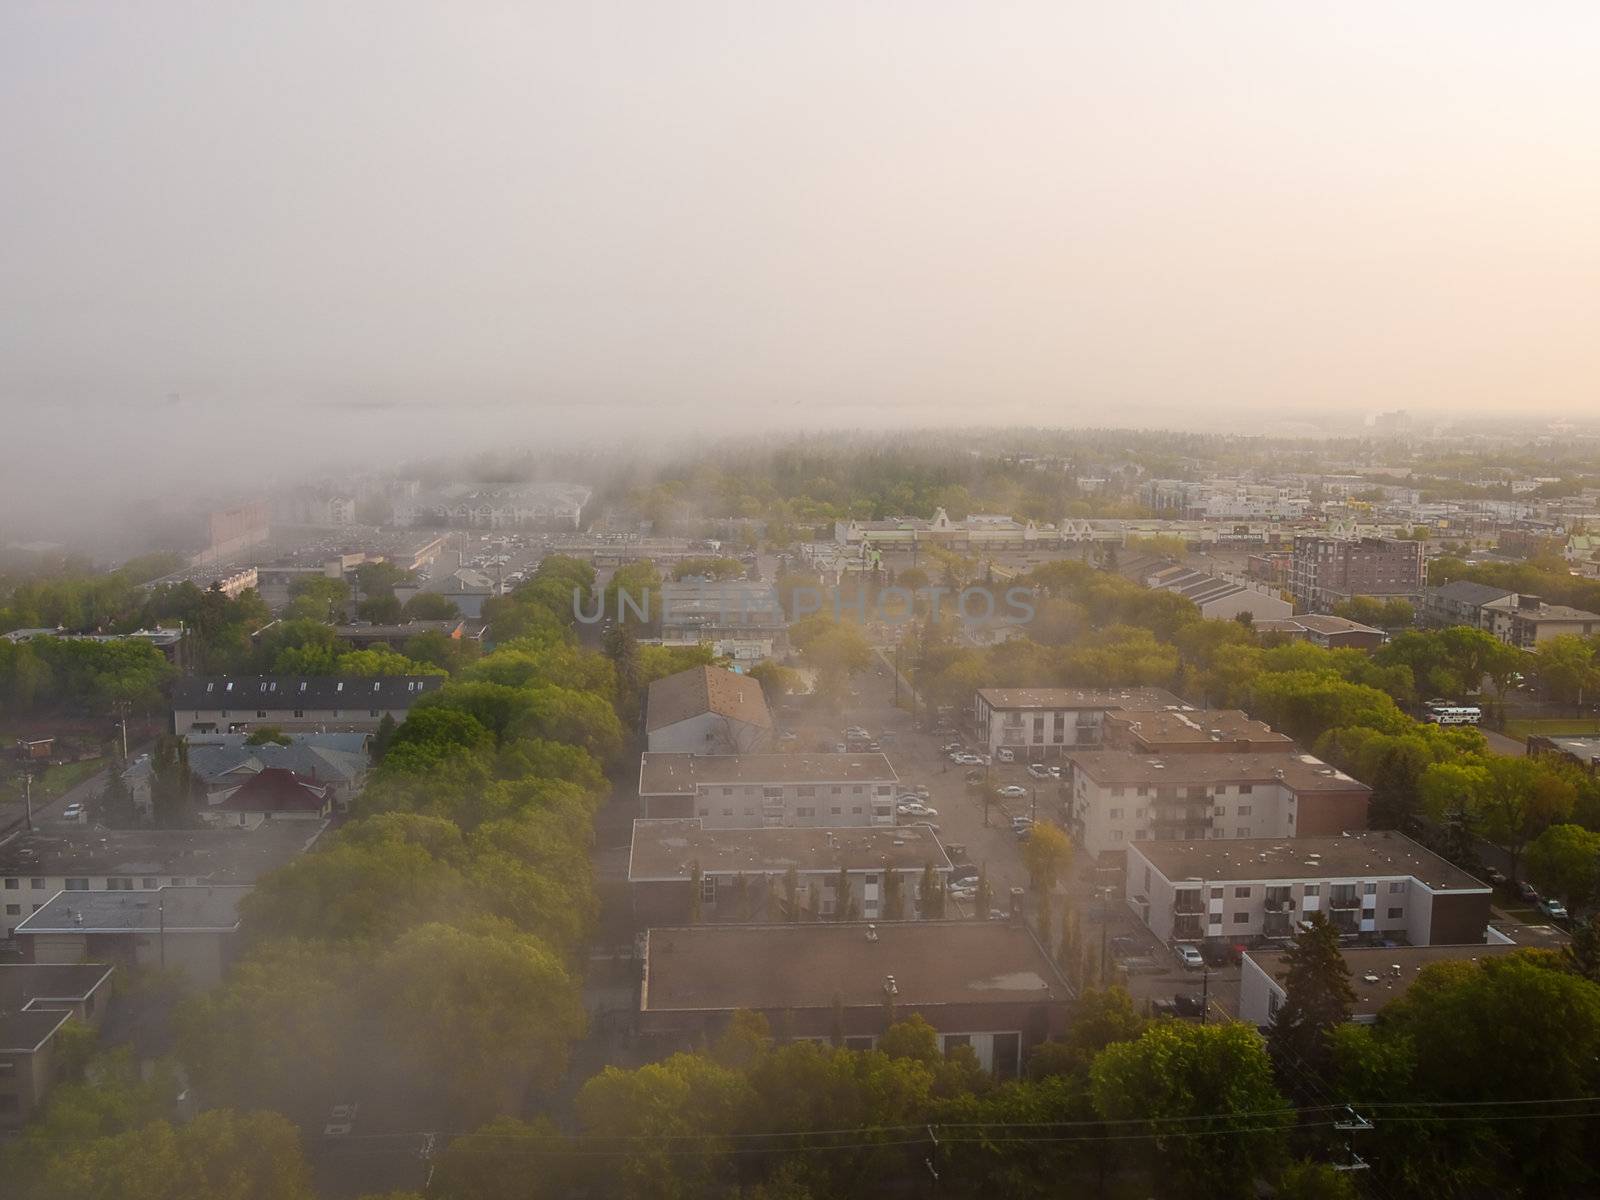 Fog rolling through a residential neighborhood on an early July morning.